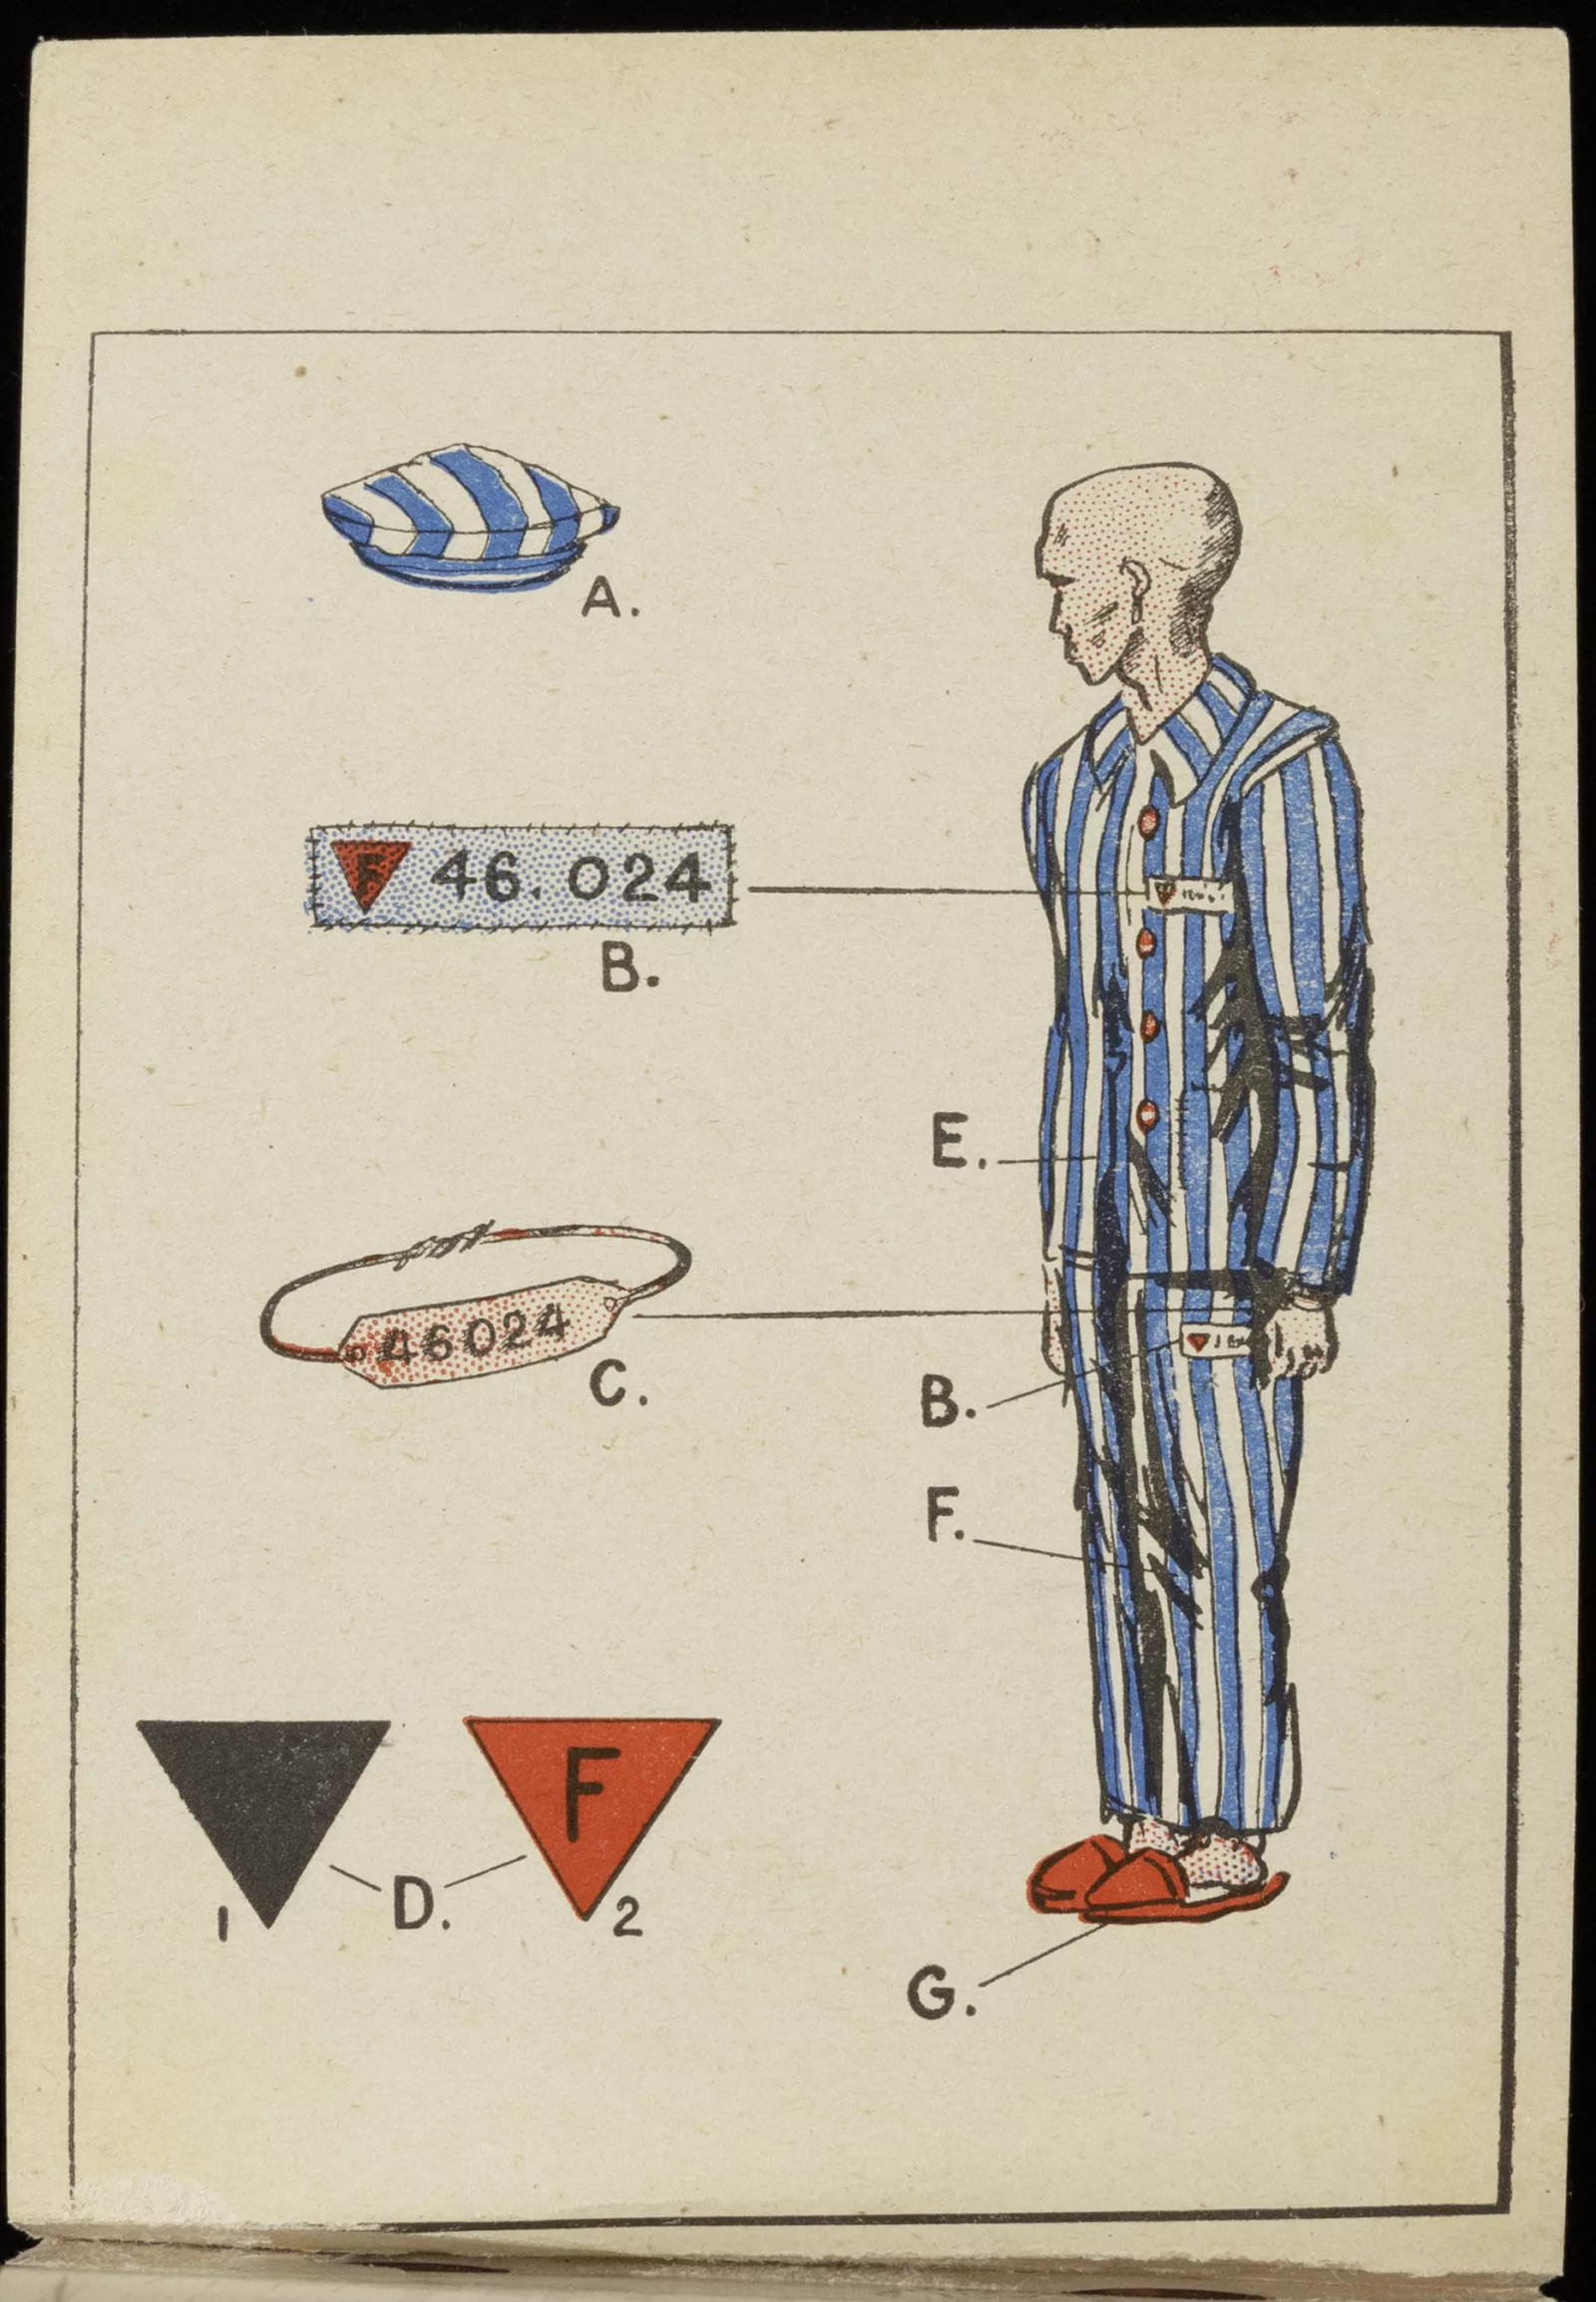 A diagram shows a concentration camp prisoner and the different pieces of their uniform.